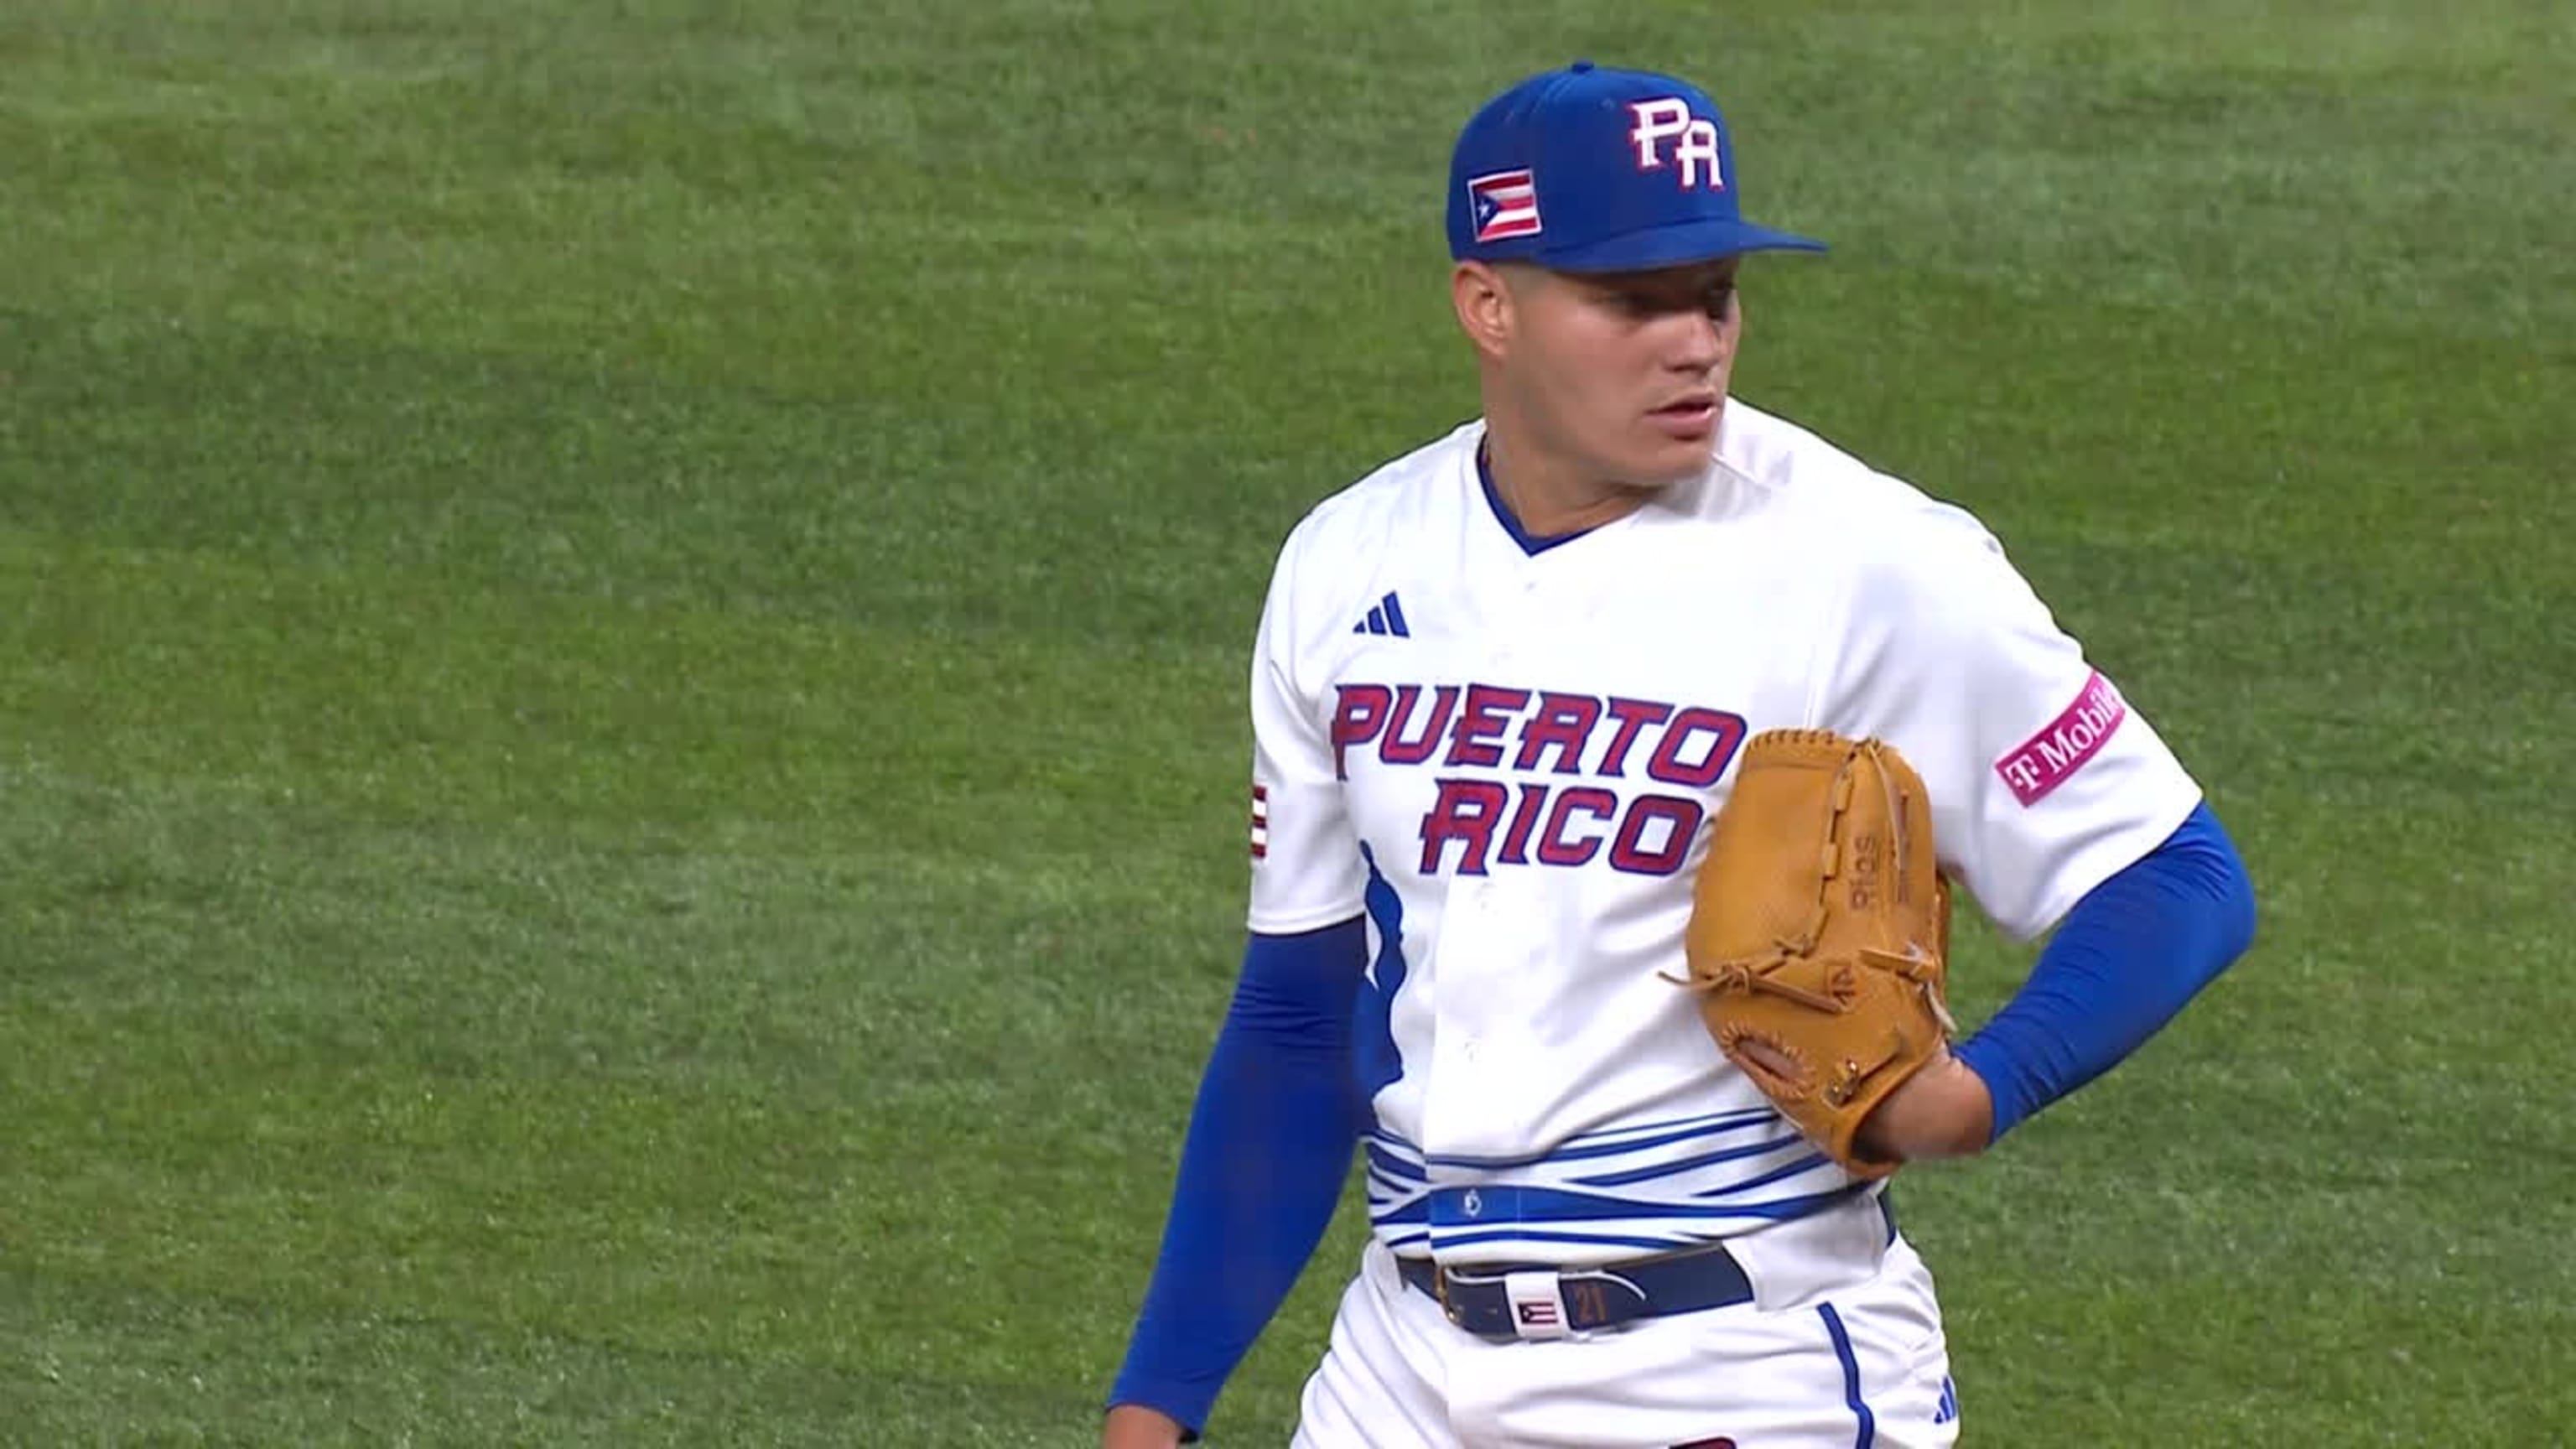 Puerto Rico is bringing a strong team to the World Baseball Classic -  Beyond the Box Score